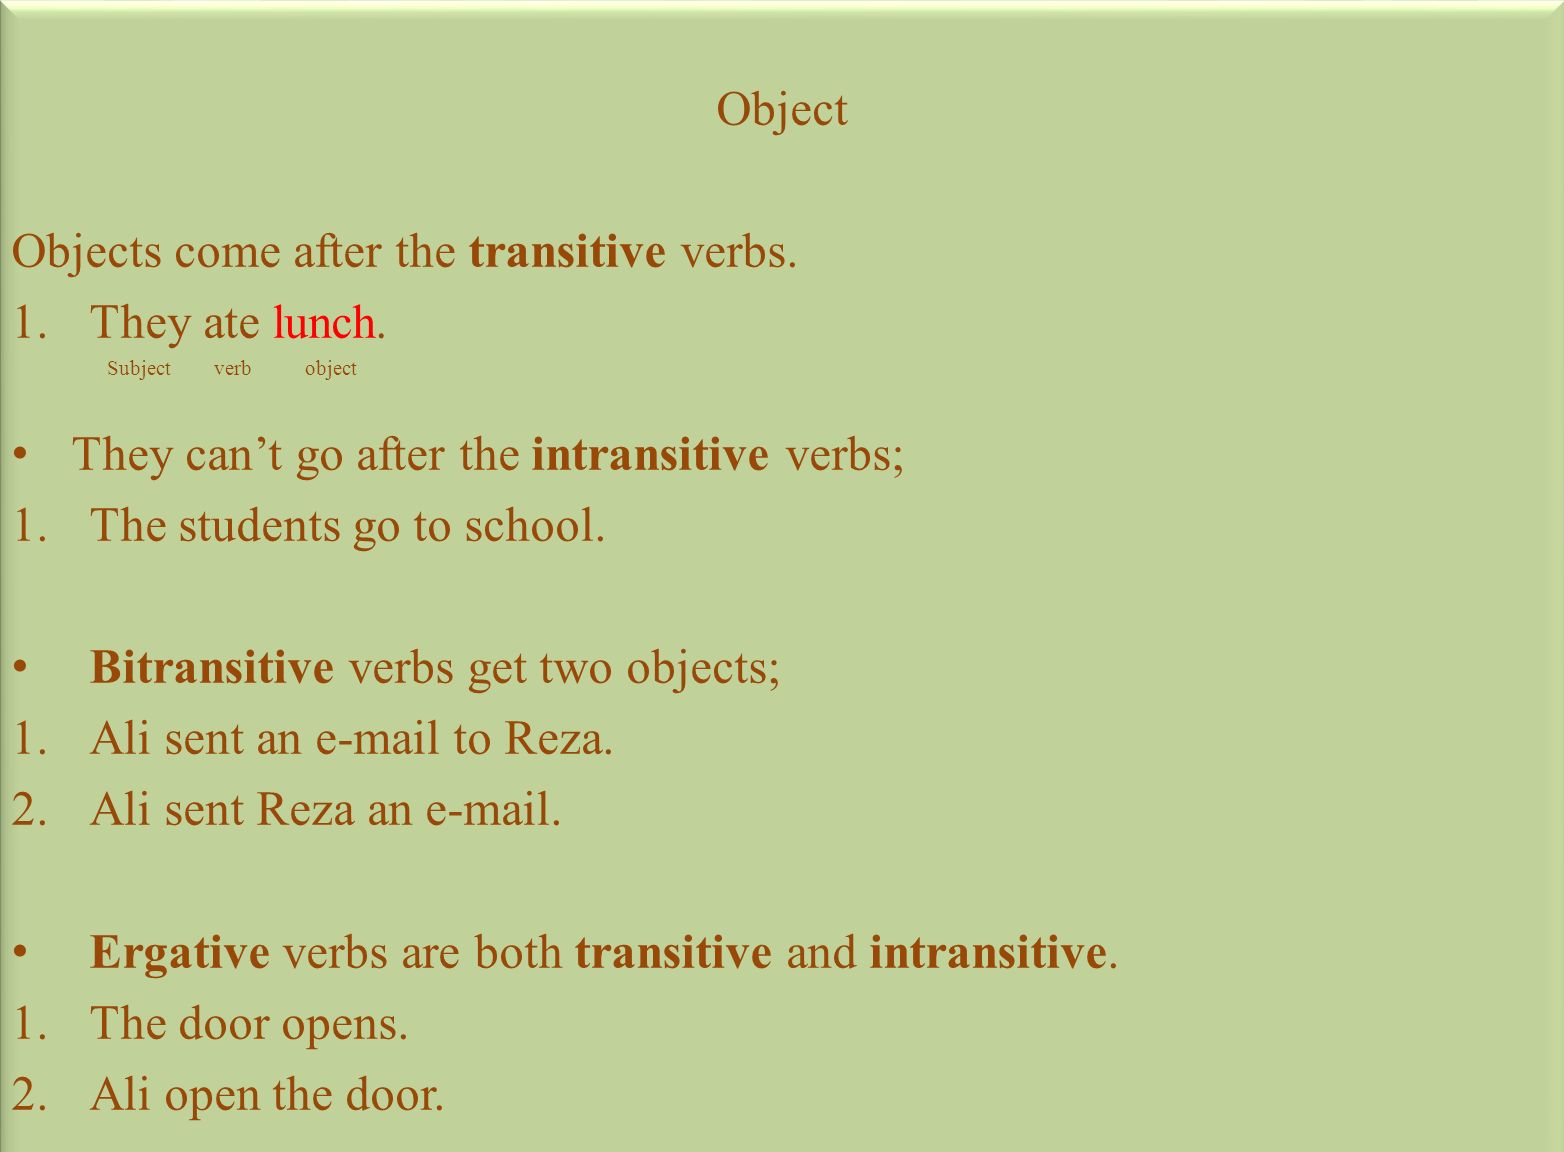 Objects come after the transitive verbs. They ate lunch.